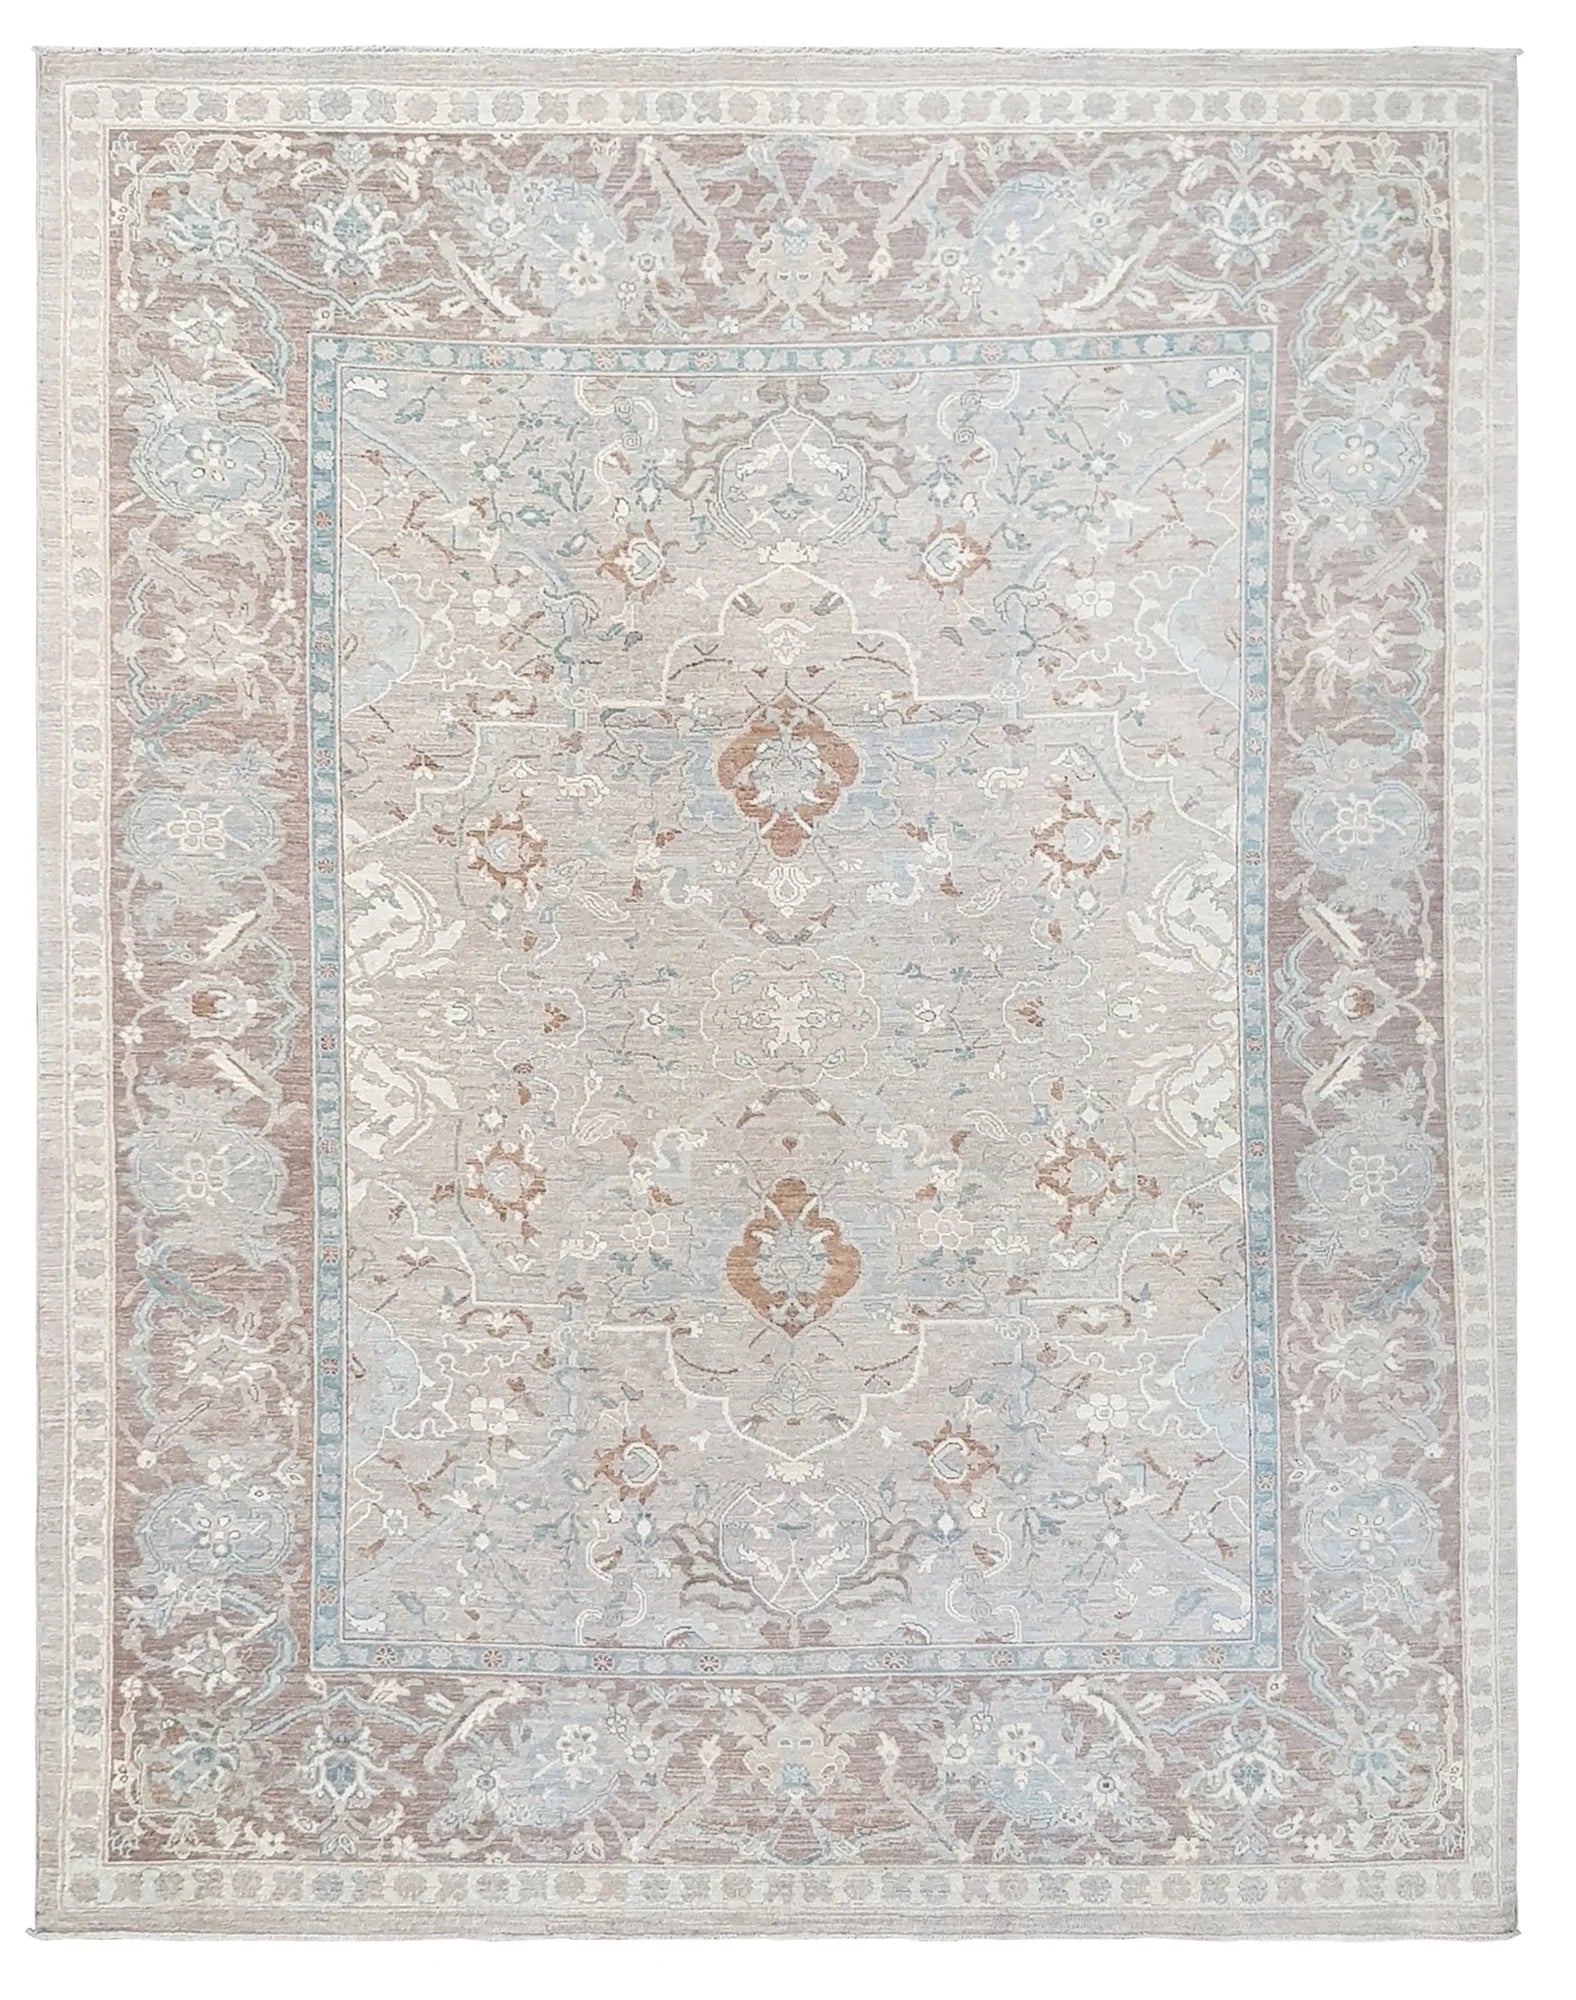 Classical Handwoven Transitional Rug